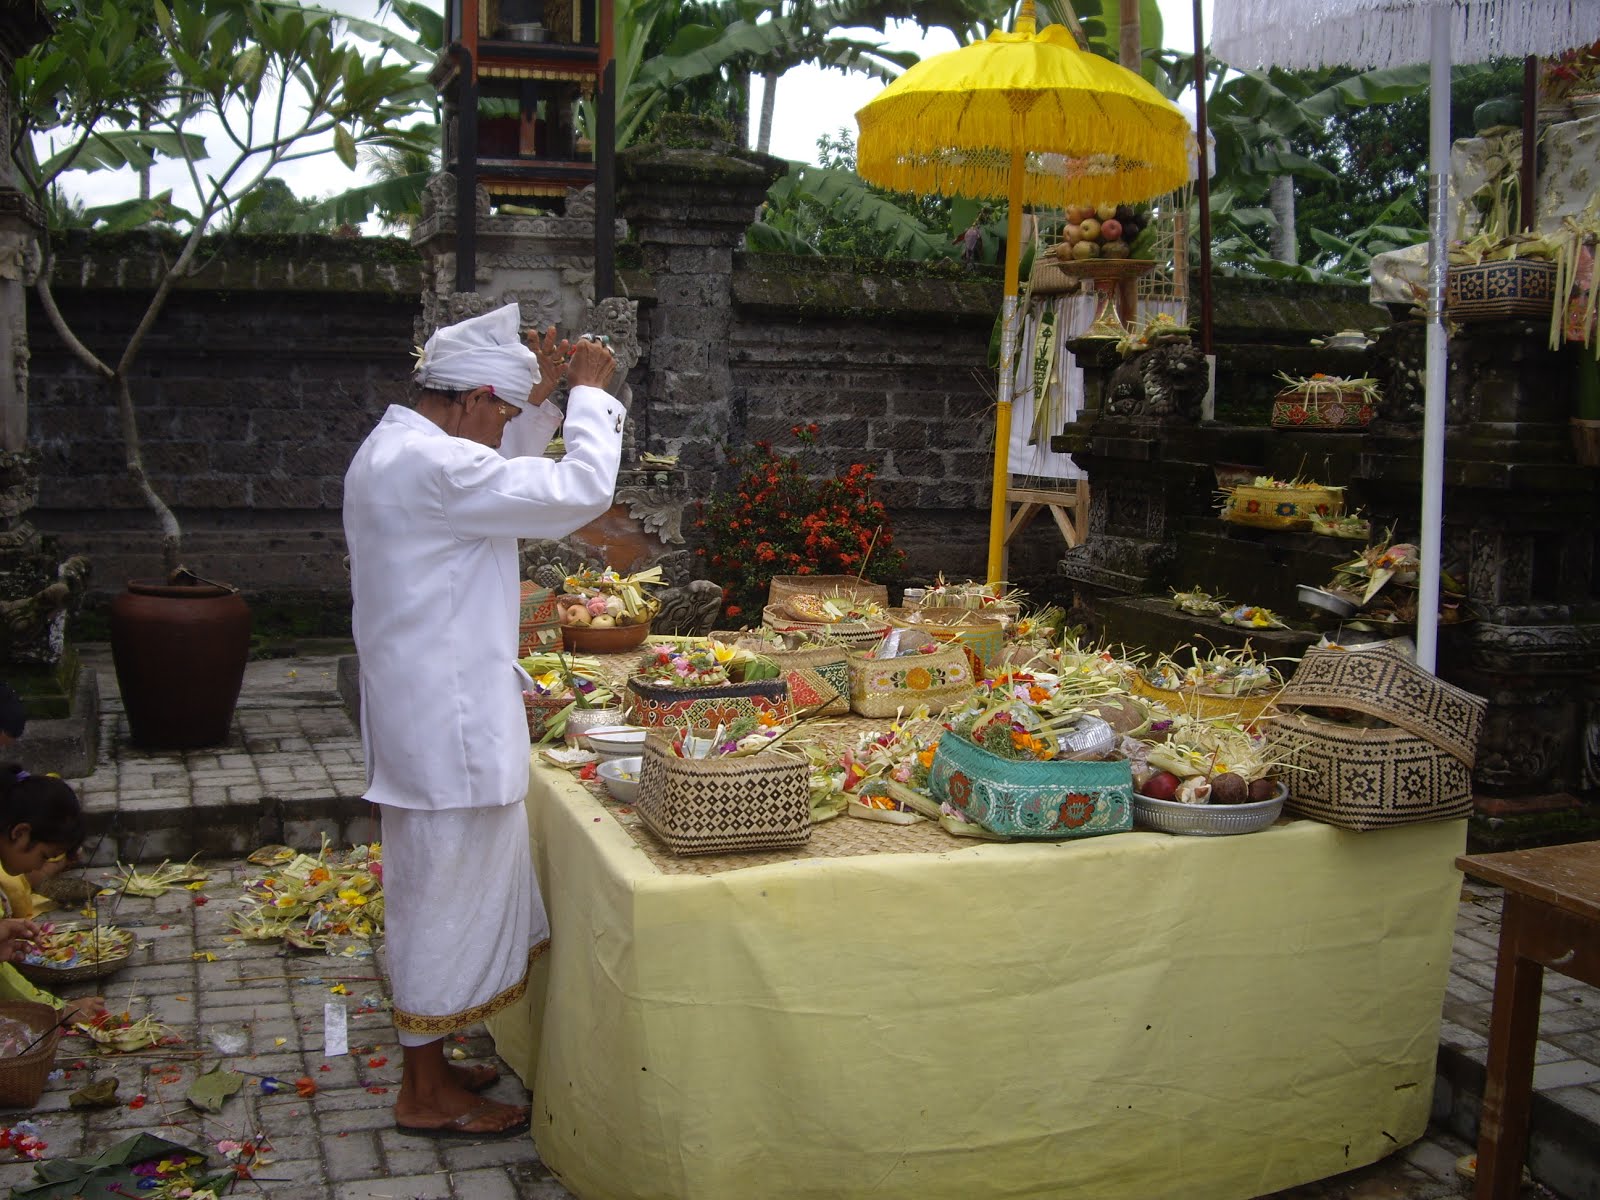 A VILLAGE PRIEST (PEMANGKU) BLESSES THE OFFERINGS BROUGHT TO THE TEMPLE